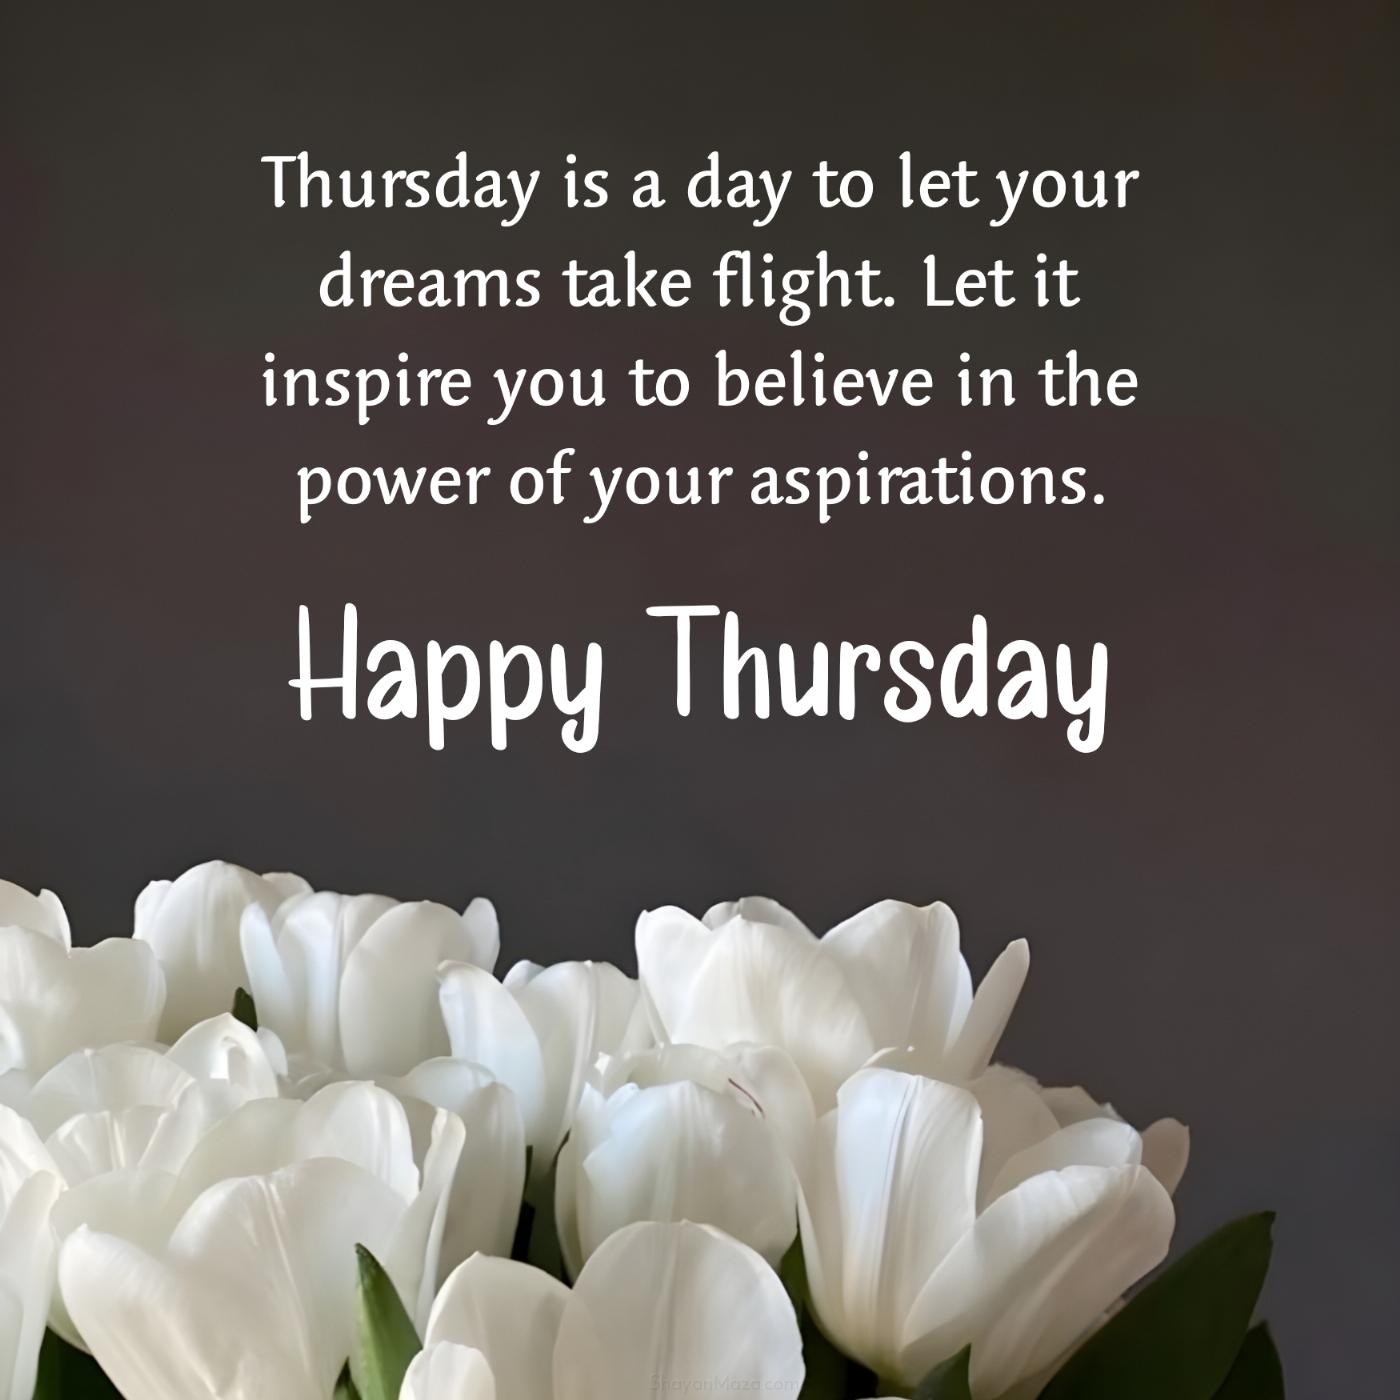 Thursday is a day to let your dreams take flight